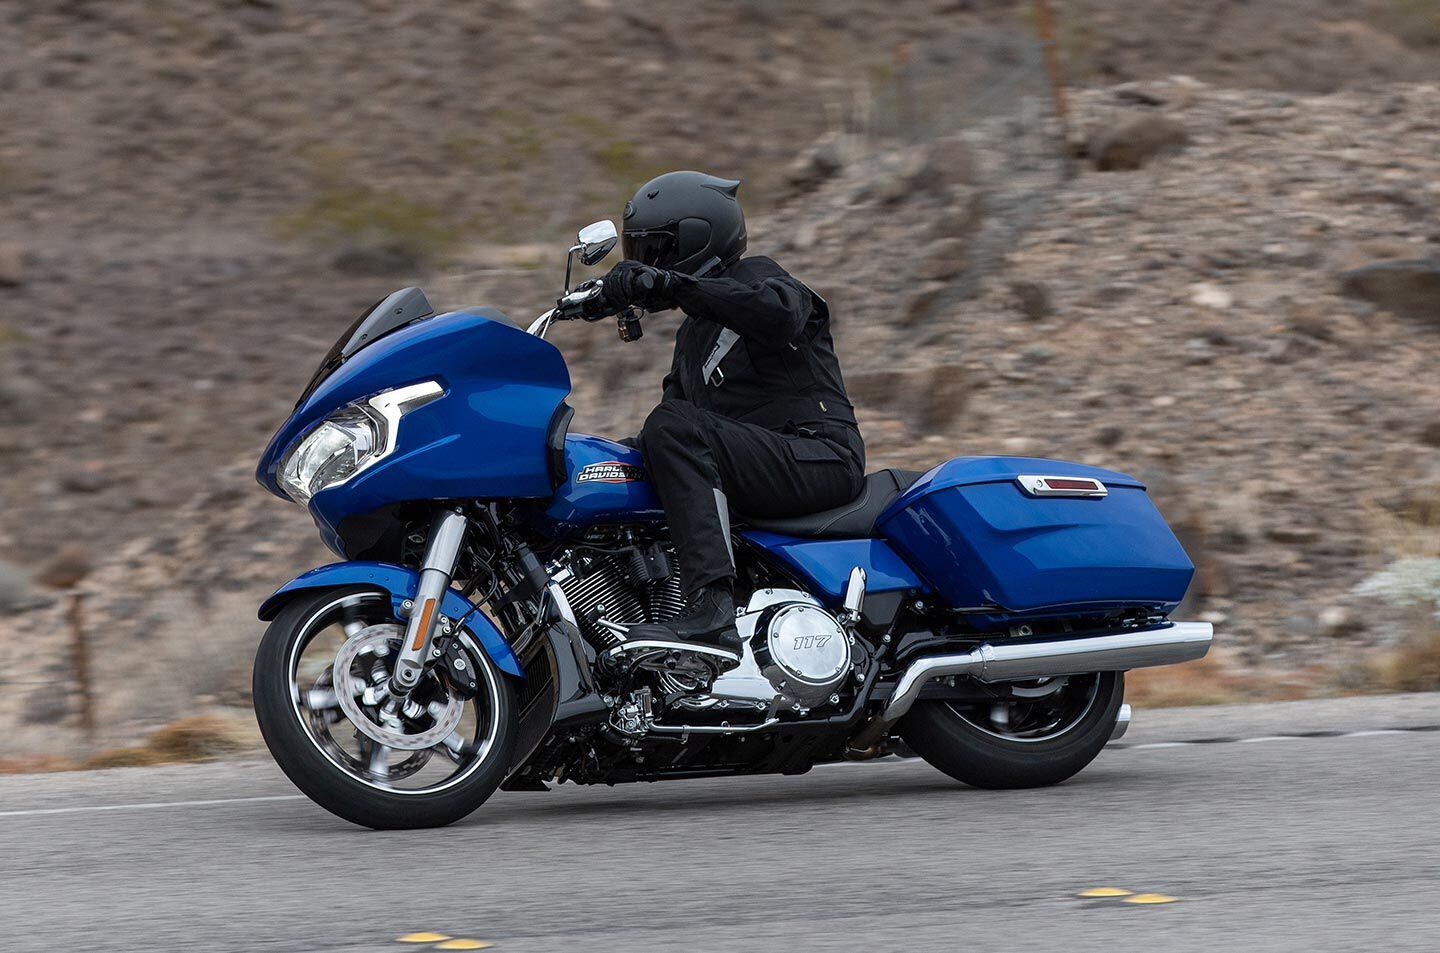 Harley-Davidson’s regal-riding Road Glide is now good for 130 lb.-ft. of torque, says The Motor Company.